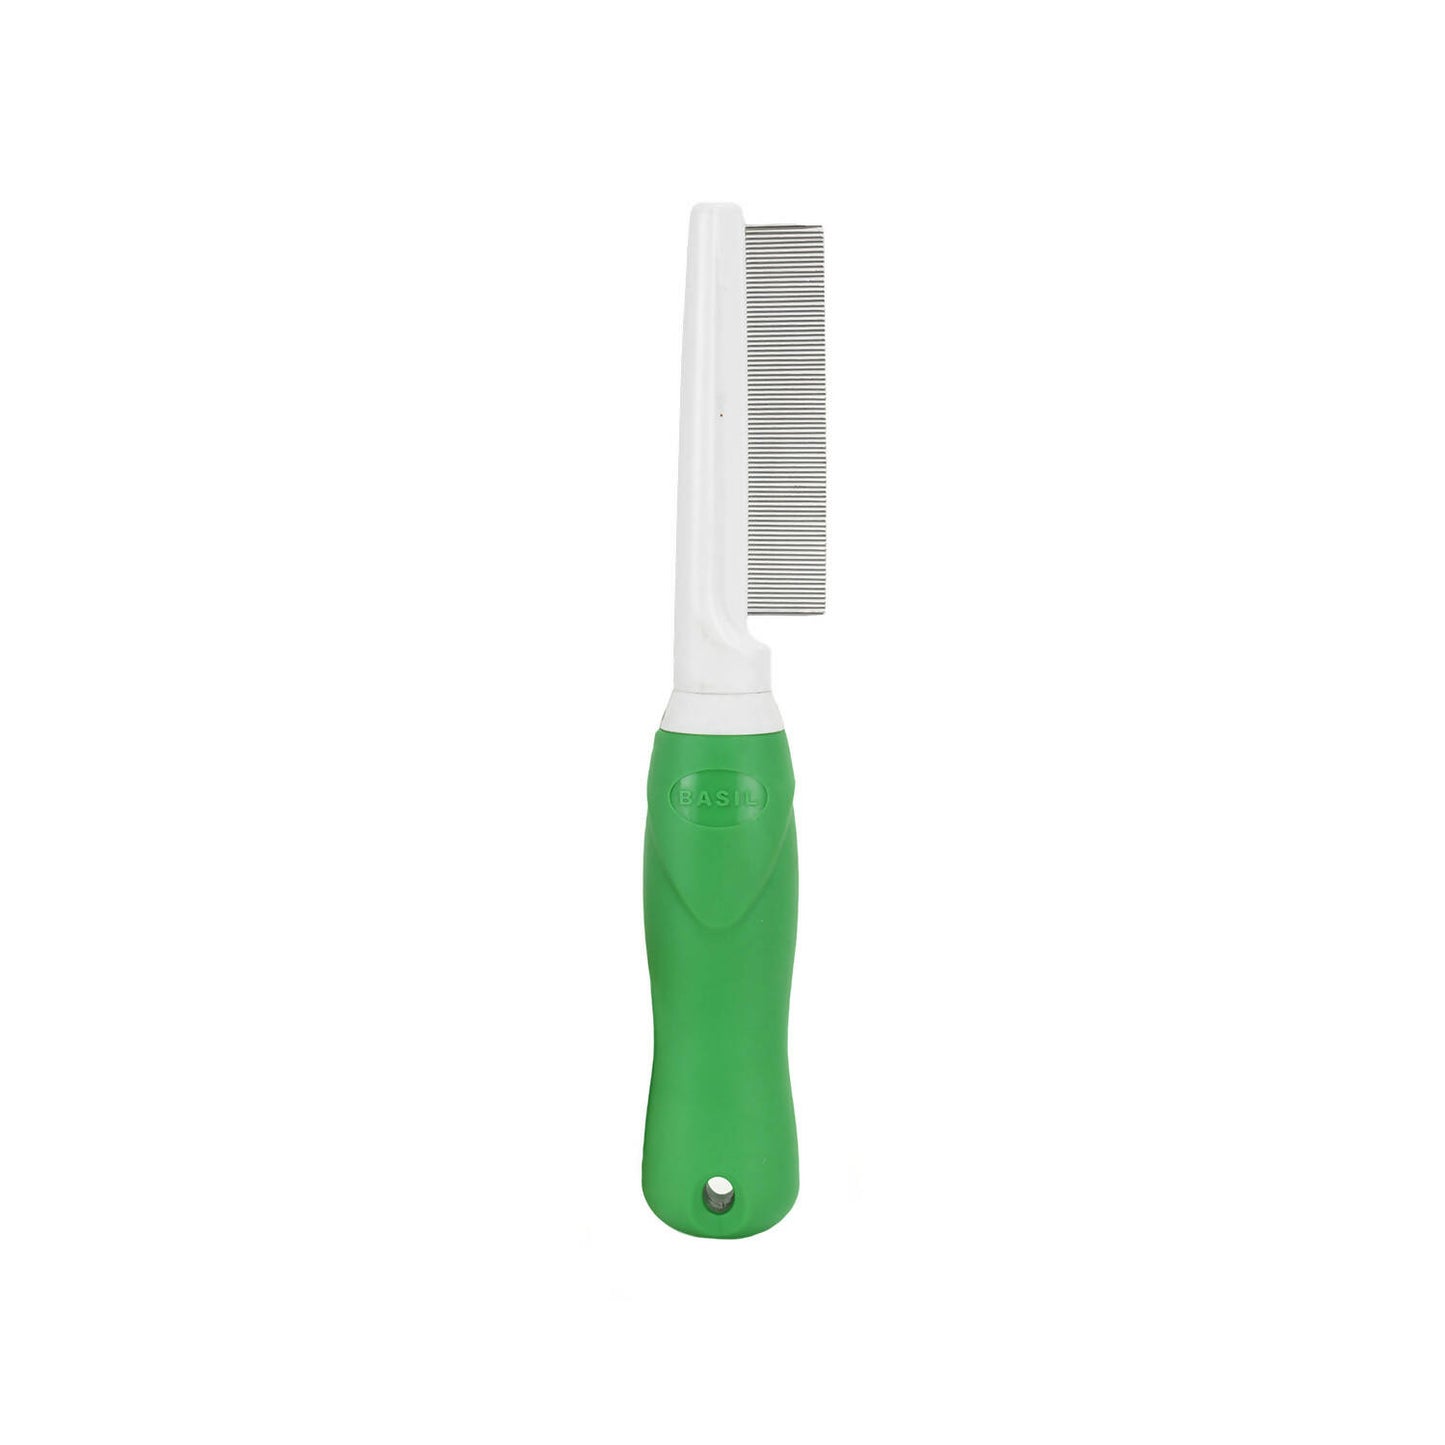 Basil - Flea Comb For Dogs And Cats